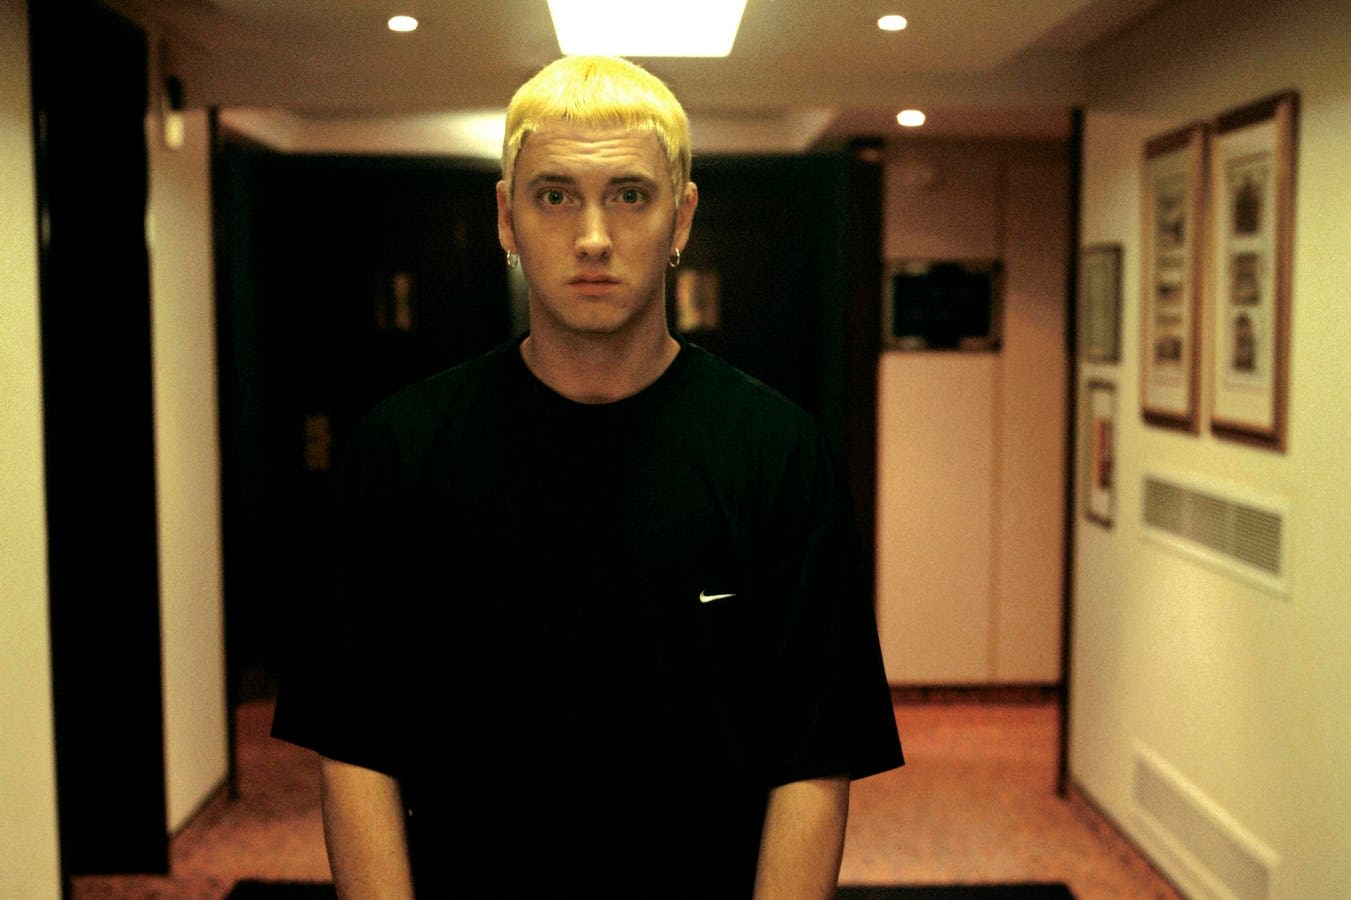 Eminem’s ‘Lose Yourself’ Is Keeping One Of His Biggest Albums Going